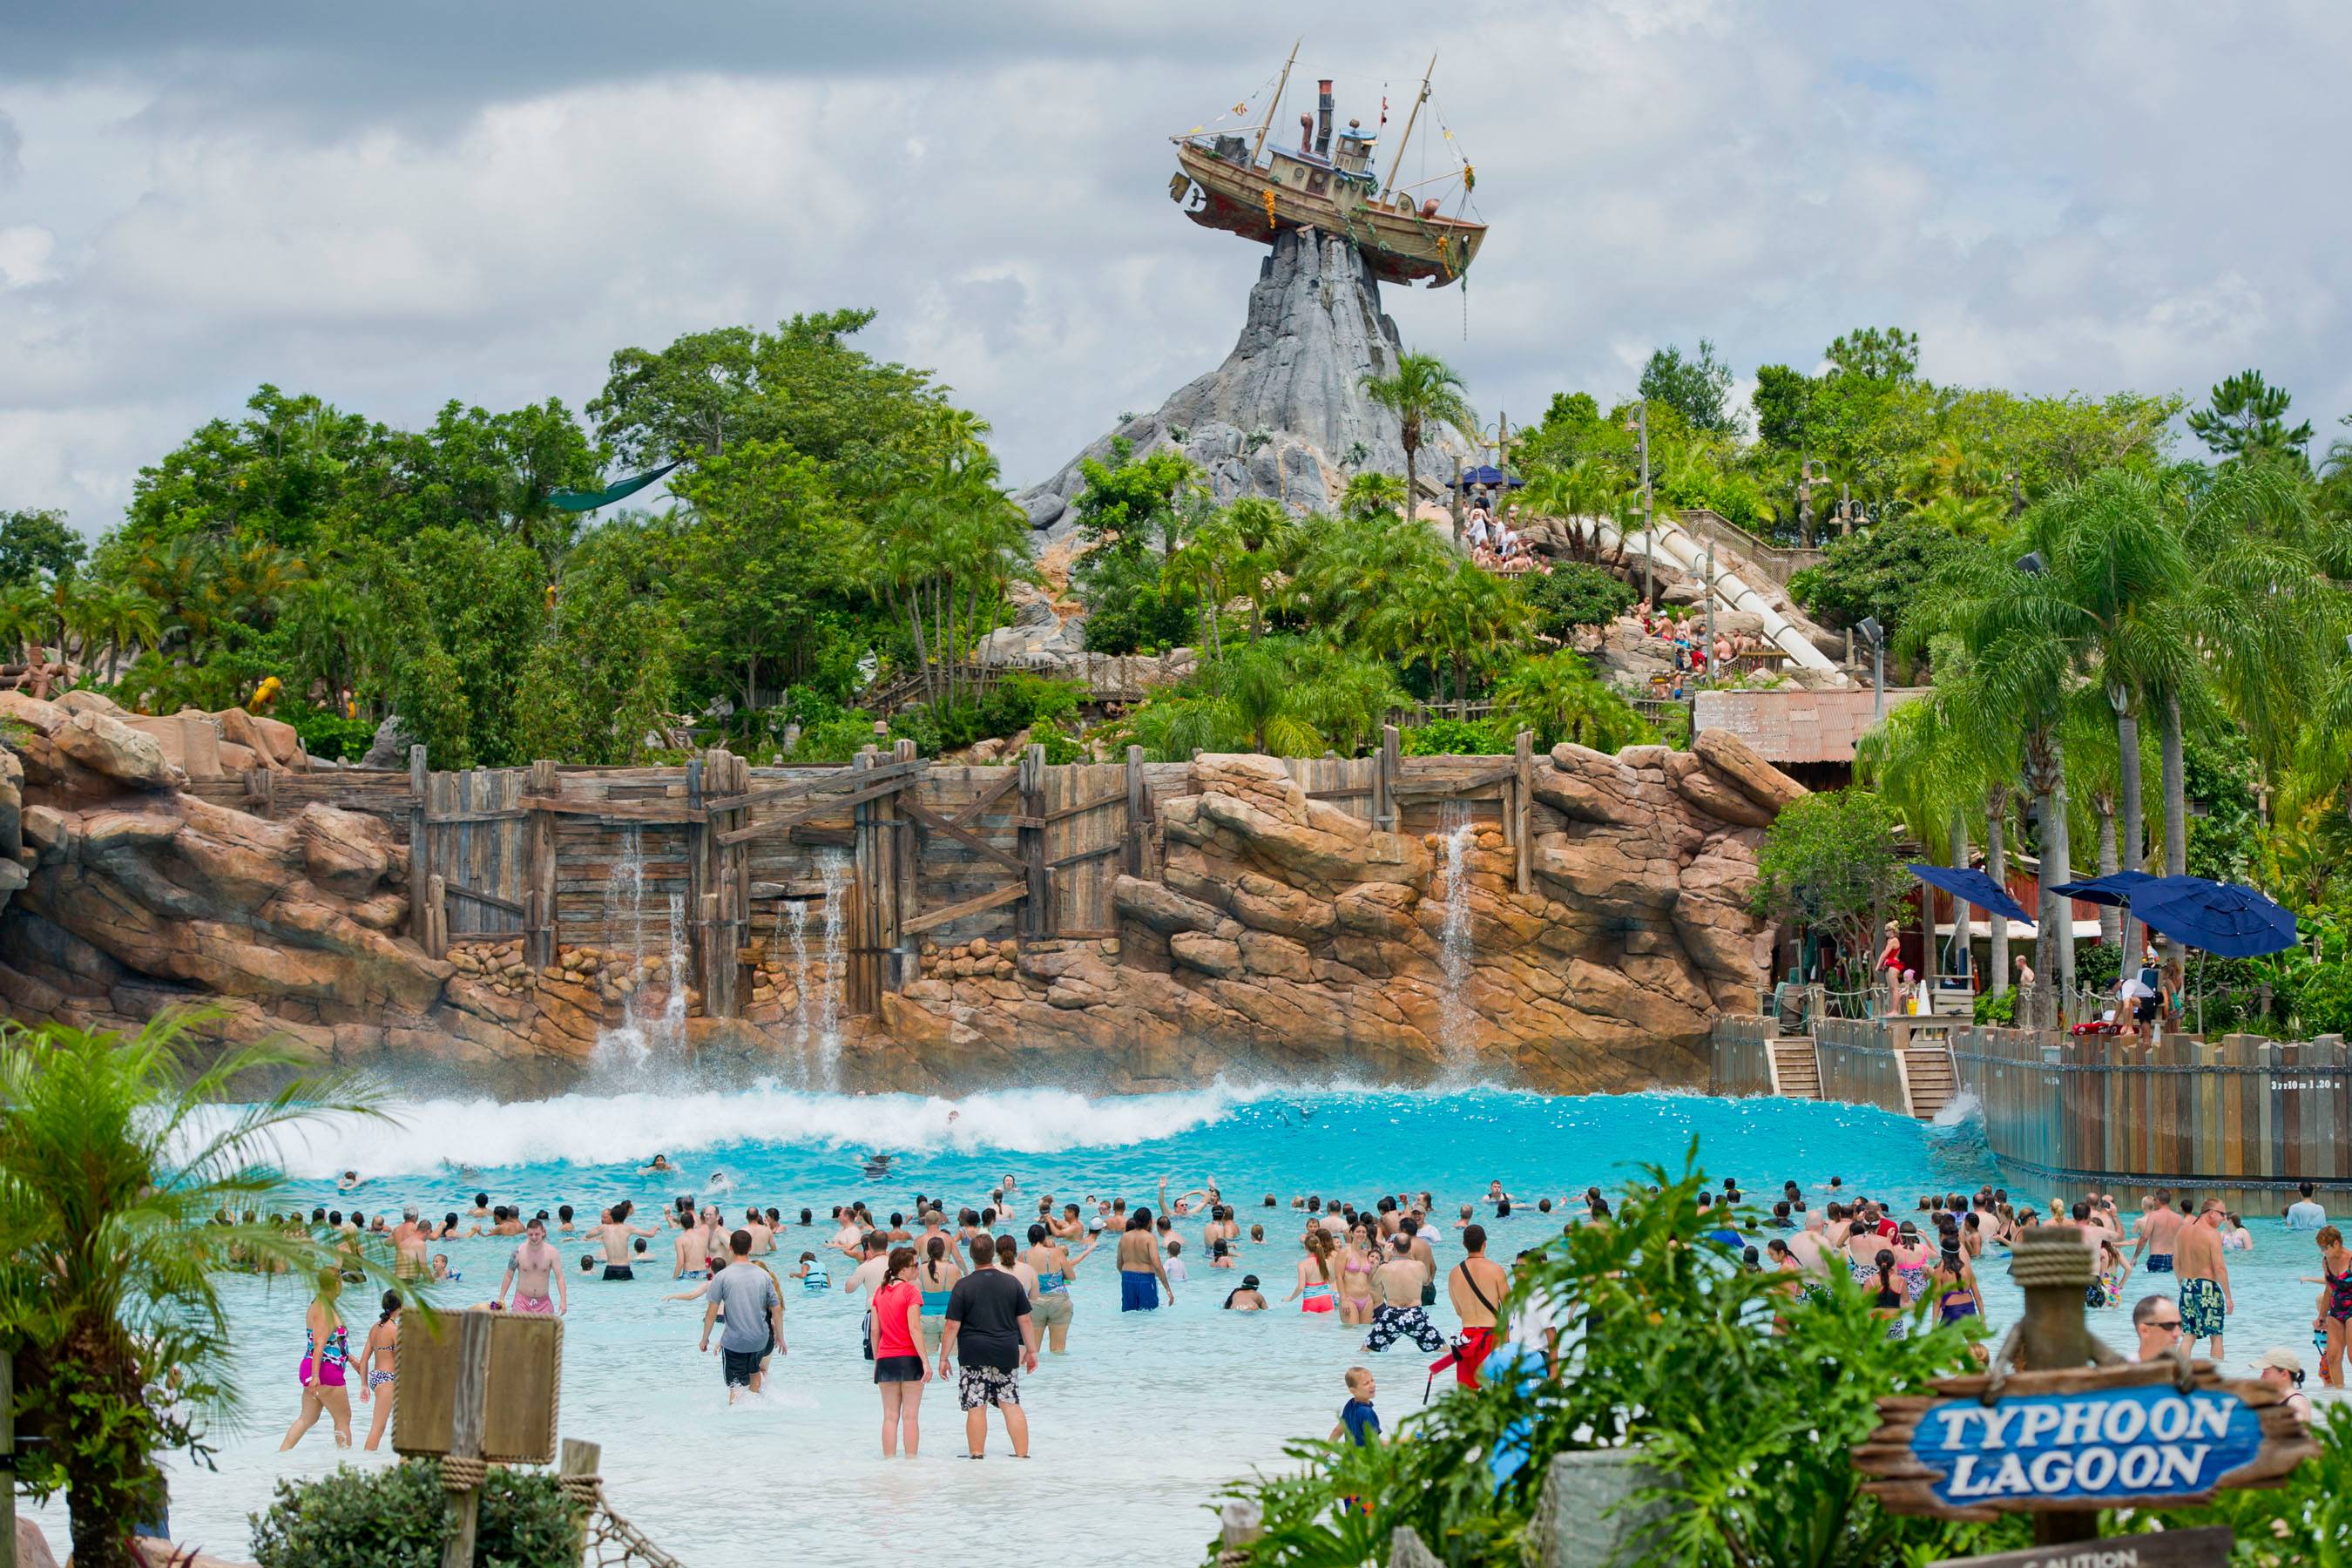 Disney announces plans to reopen one of Walt Disney World's water parks in March 2021